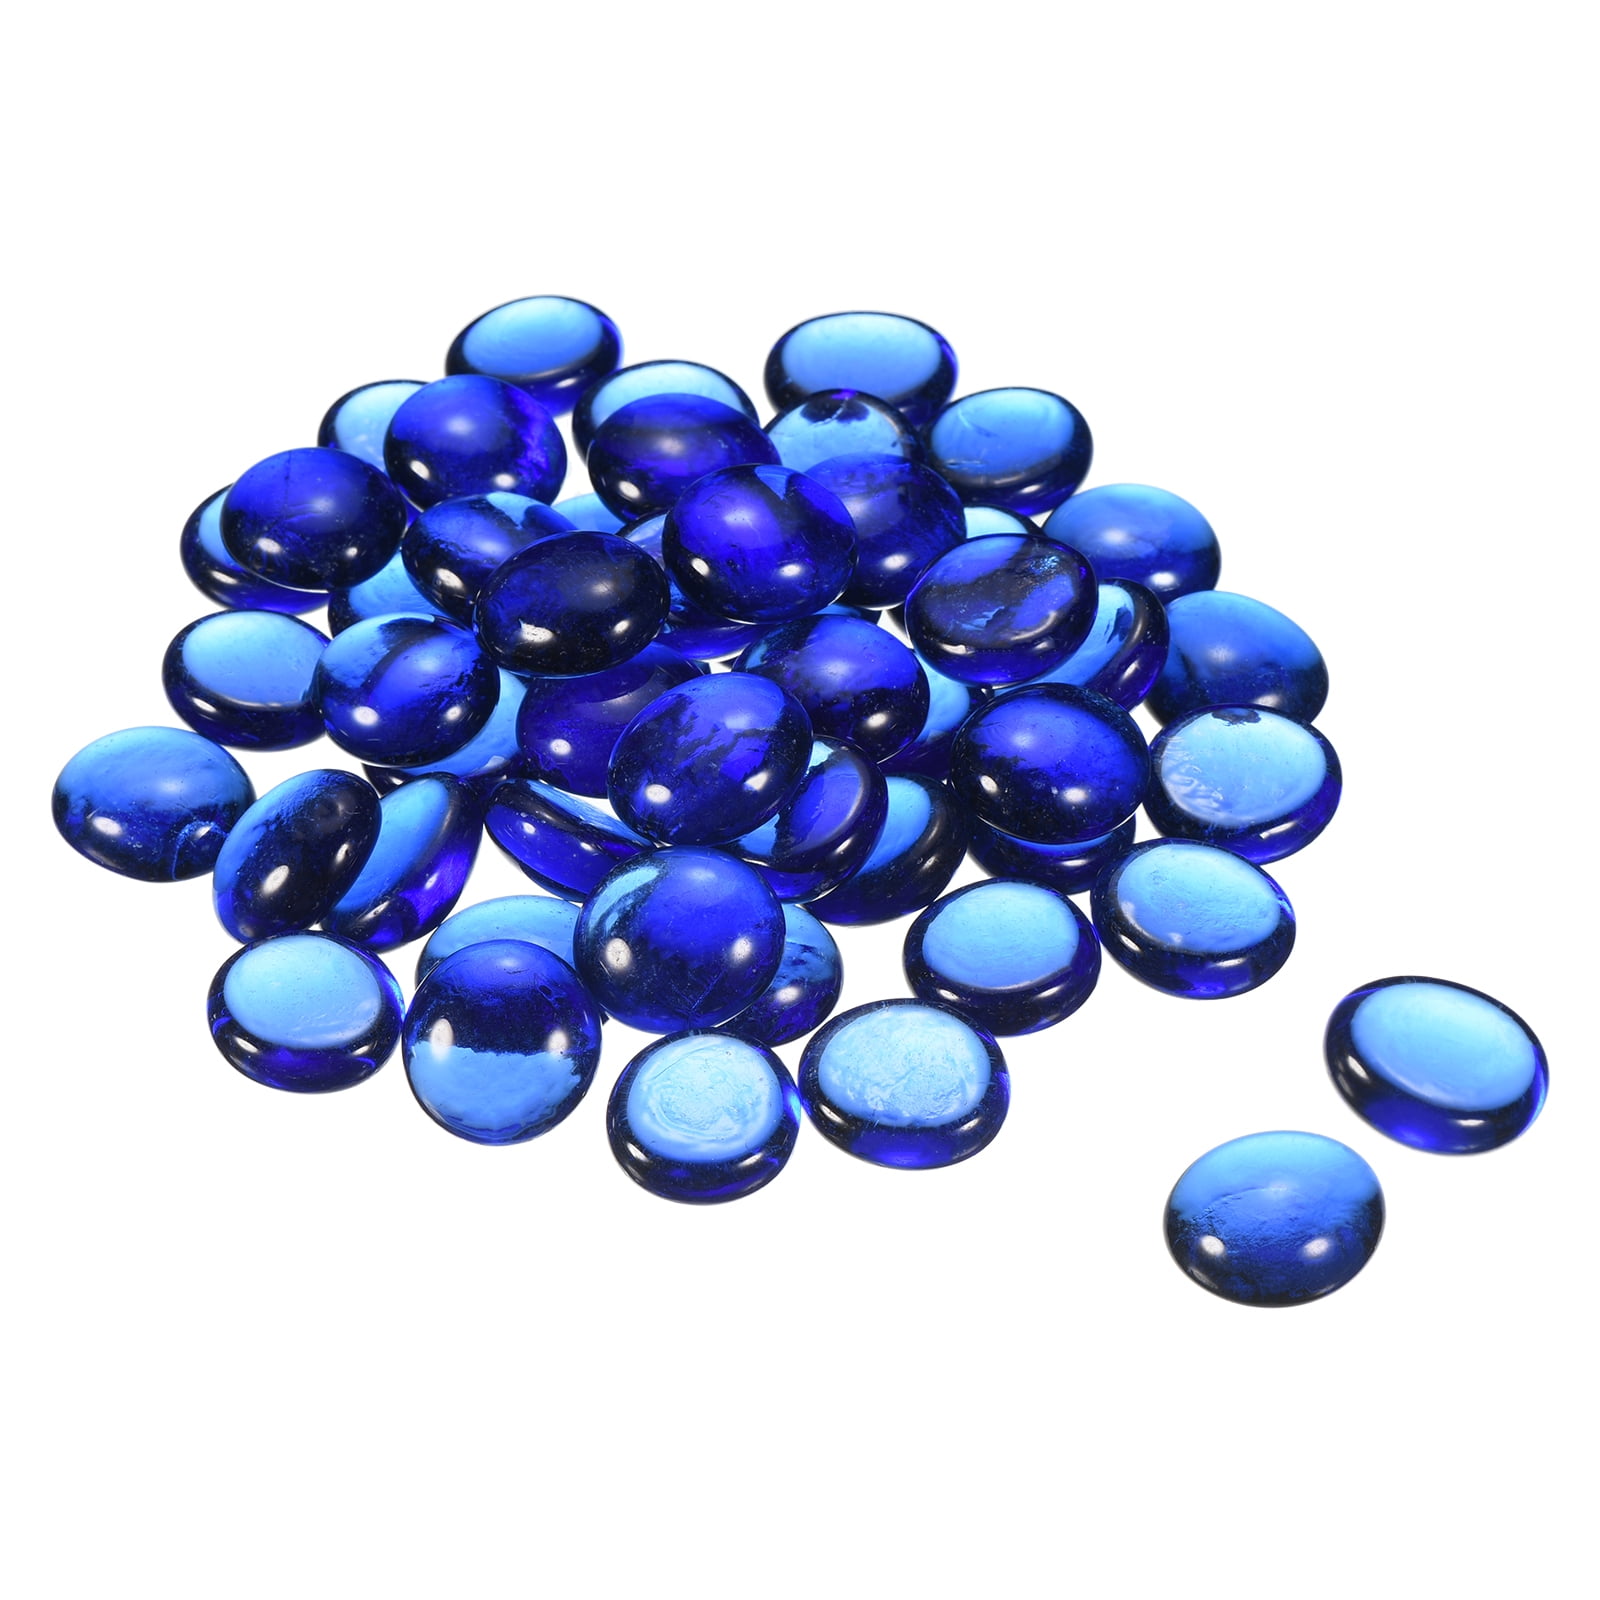 Uxcell Decorative Flat Glass Marbles 17-19mm Rock Vase Filler Blue for Fish  Tank Table Scatter Decor, 50 Pcs